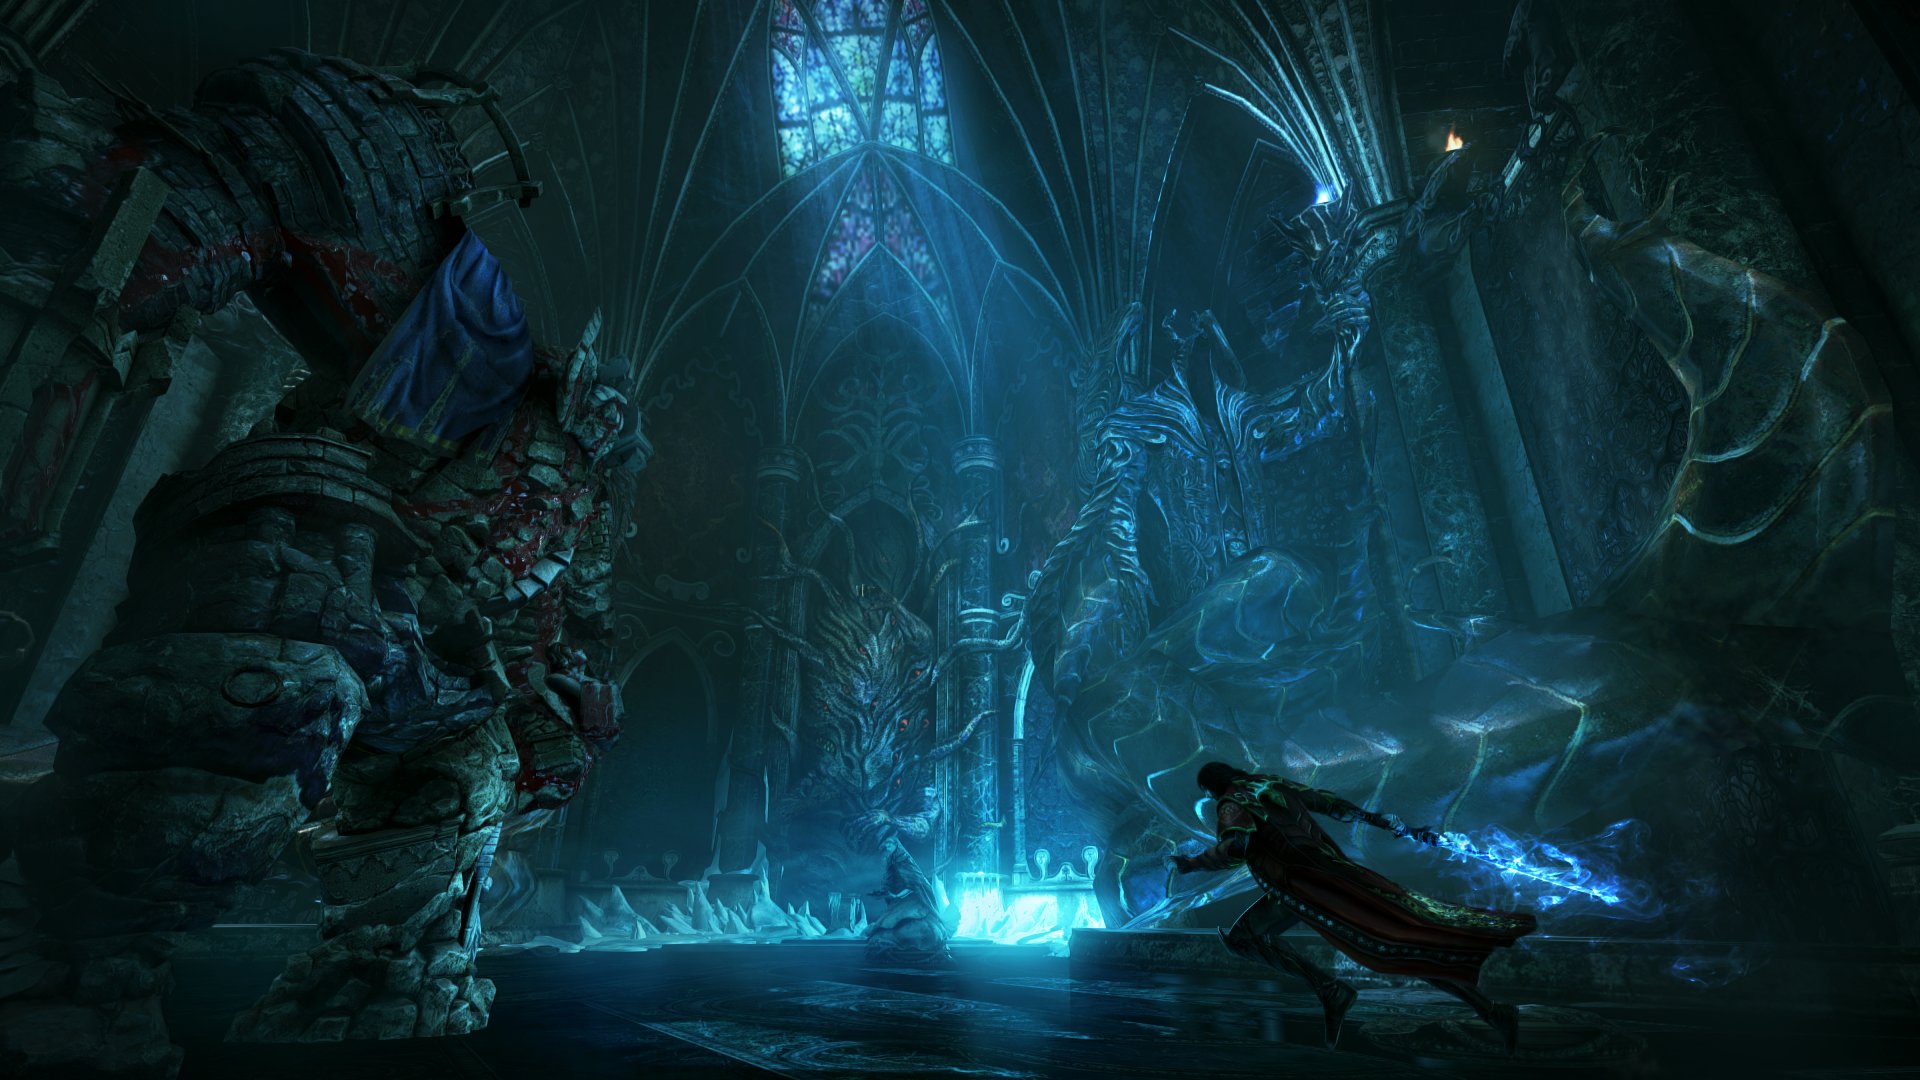 DLC for Castlevania: Lords of Shadow 2 PS3 — buy online and track price  history — PS Deals USA